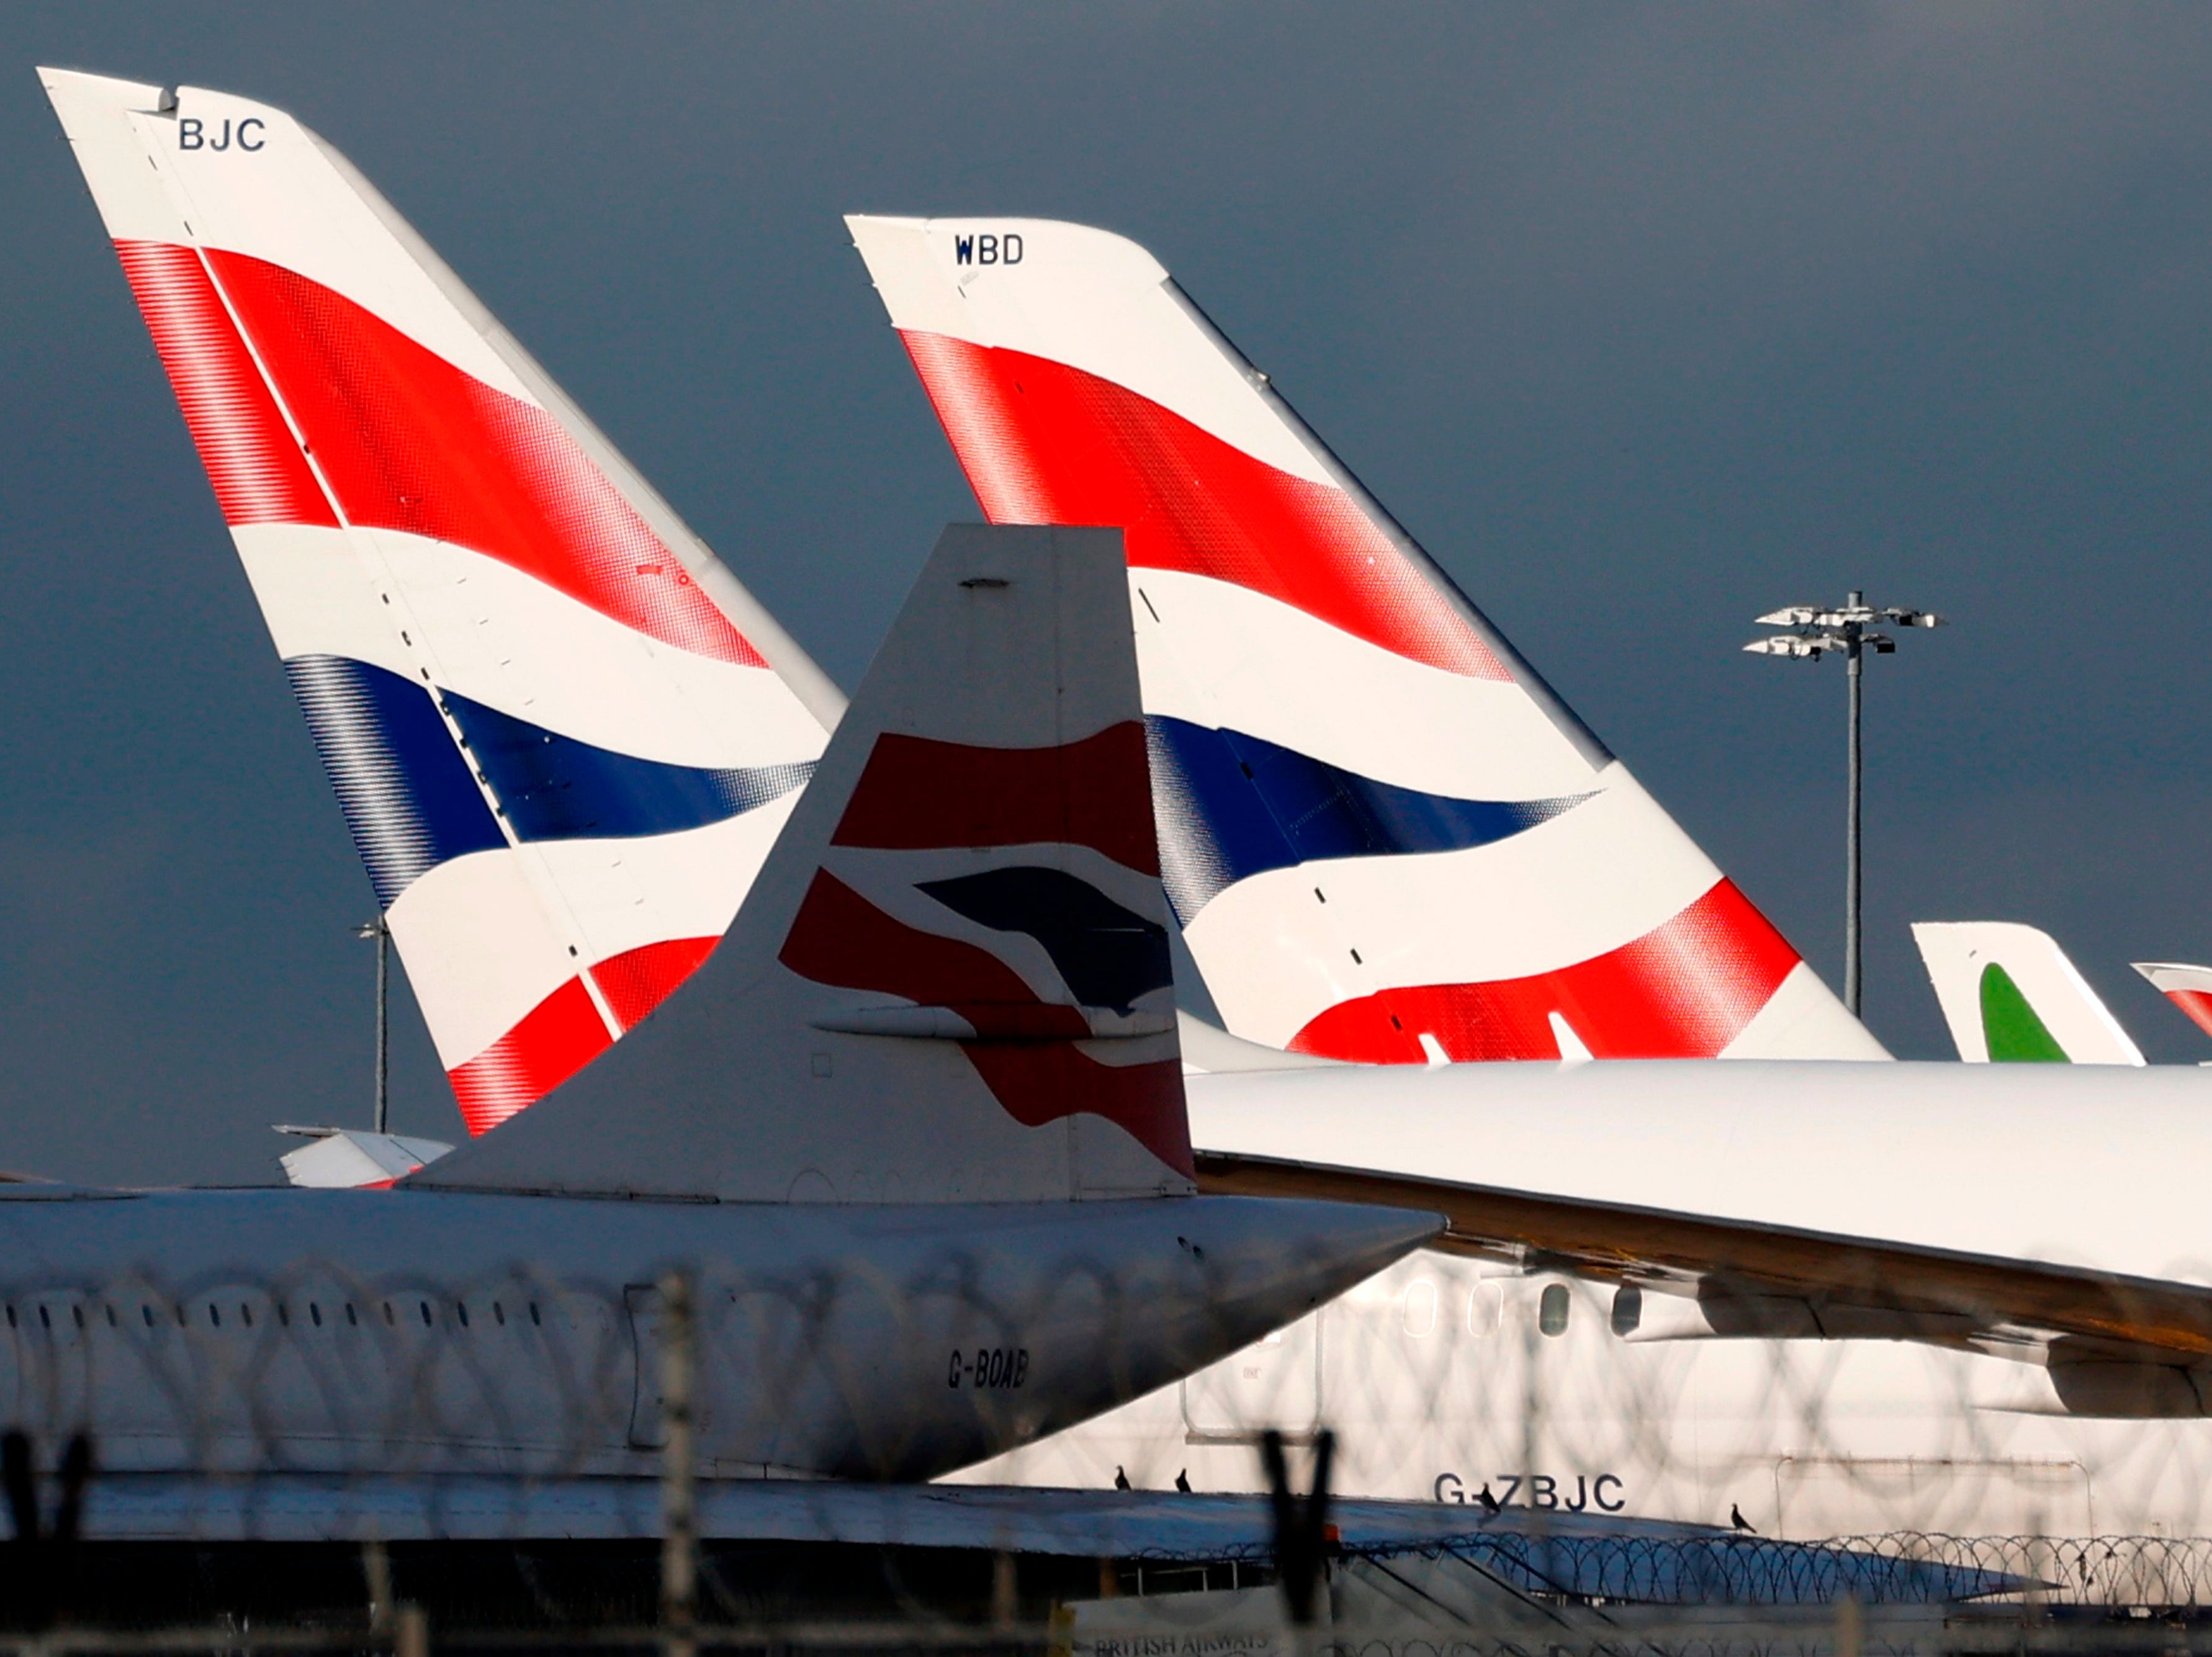 <p>Heathrow says it is working with British Airways to reunite passengers with luggage</p>